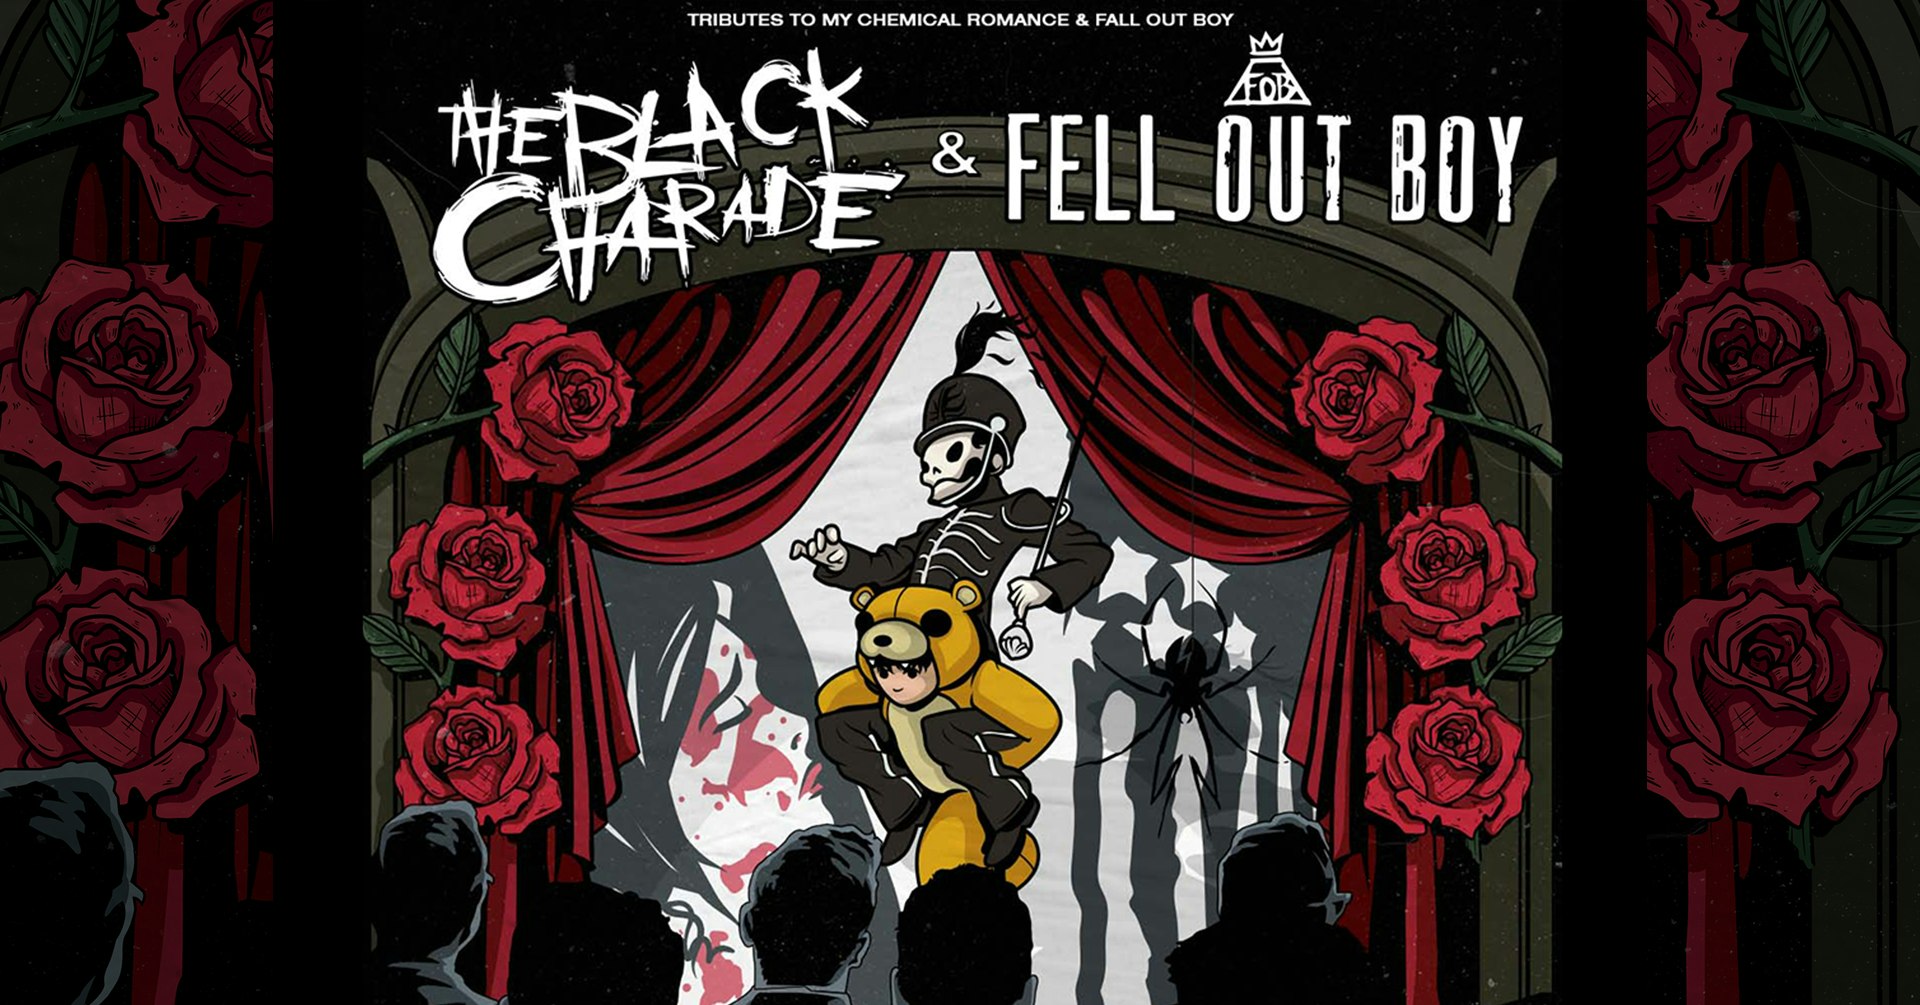 Fell Out Boy & The Black Charade (Glasgow)